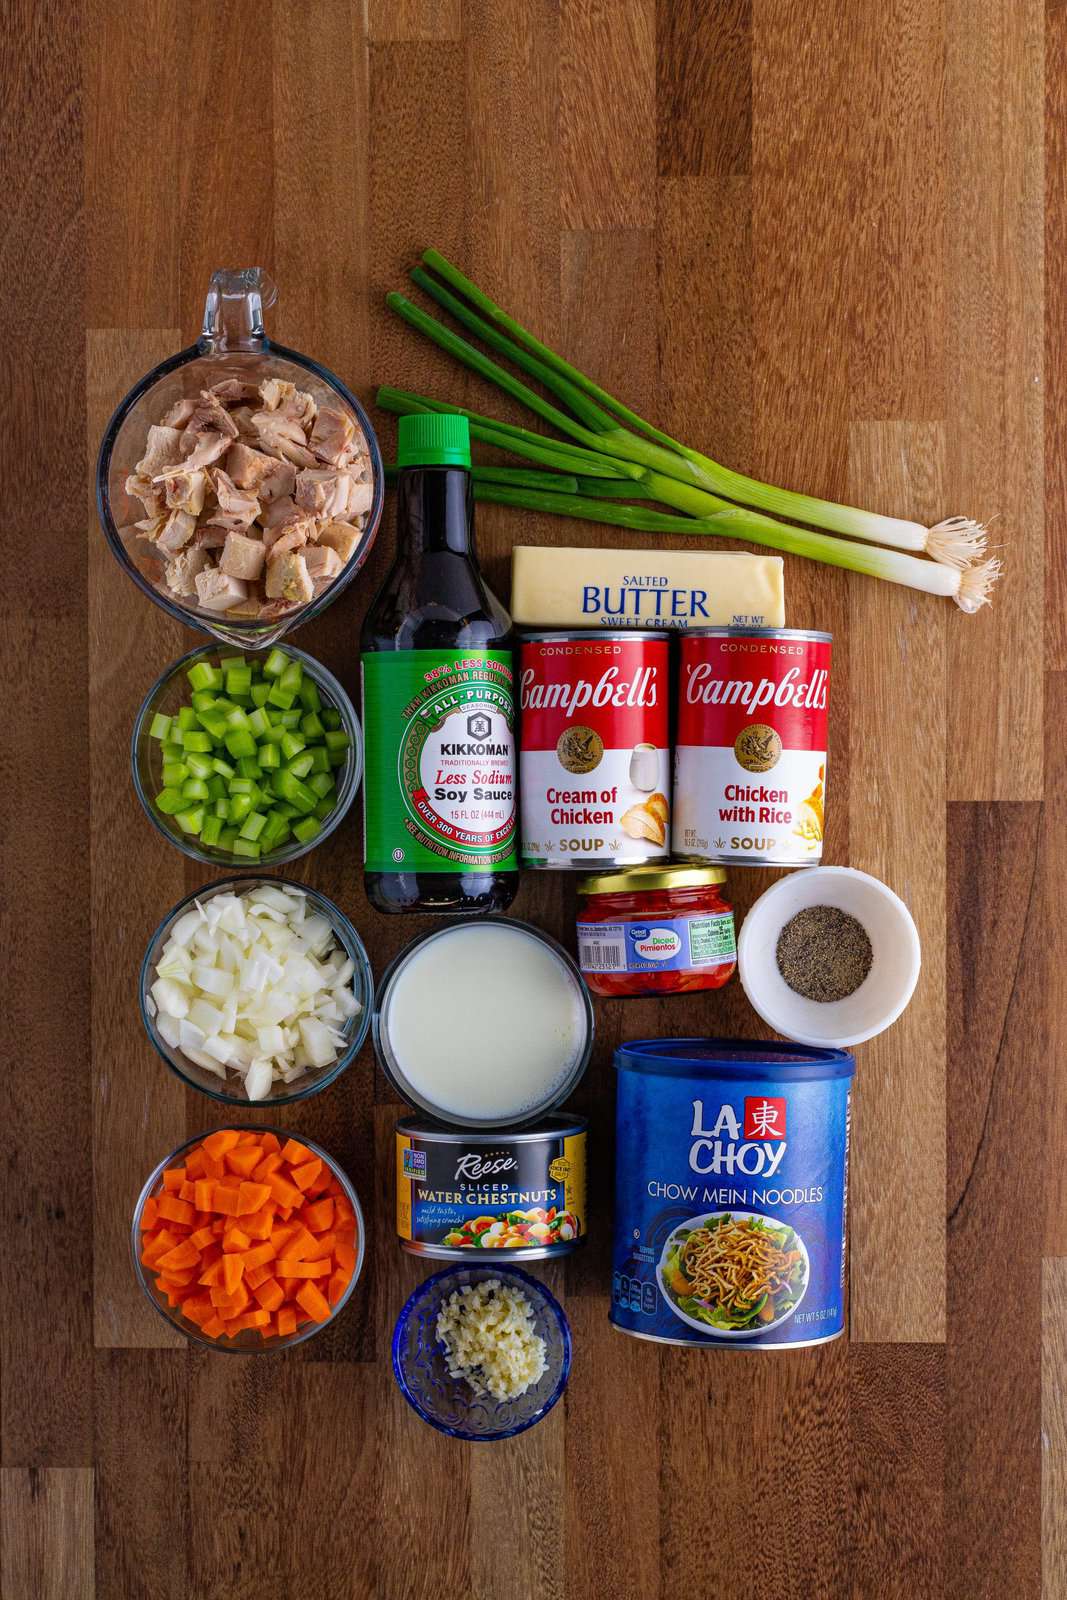 Salted butter, celery, onion, carrots, garlic, diced pimento, water chestnuts, can of cream of chicken soup, can of chicken and rice soup, milk, pepper, low sodium soy sauce, diced chicken, chow mein noodles, and green onions. 